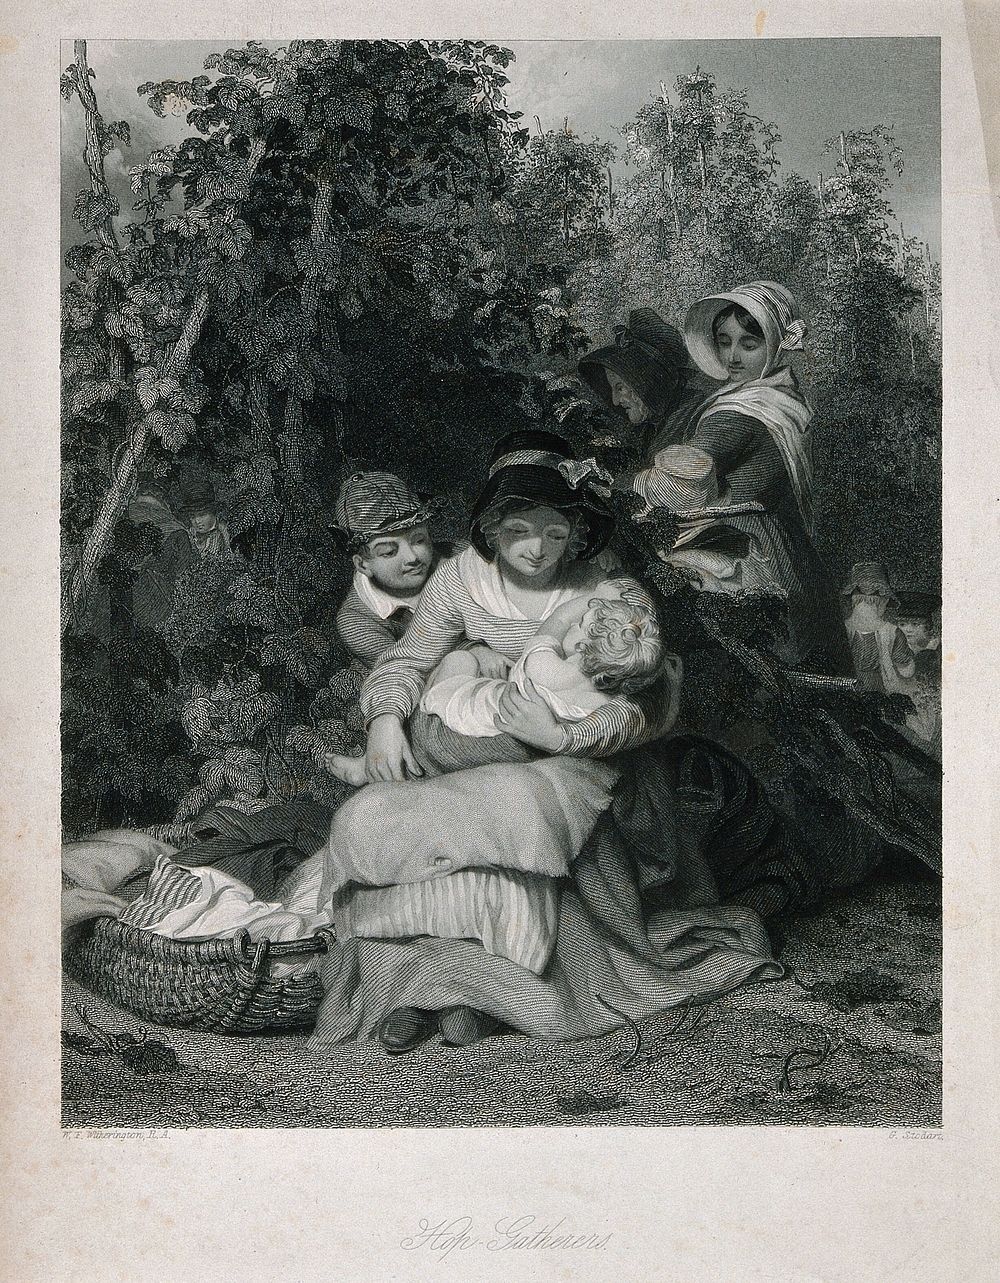 A woman with young children sitting in a hop field during harvesting. Stipple engraving with etching by G. Stodart, c. 1845…